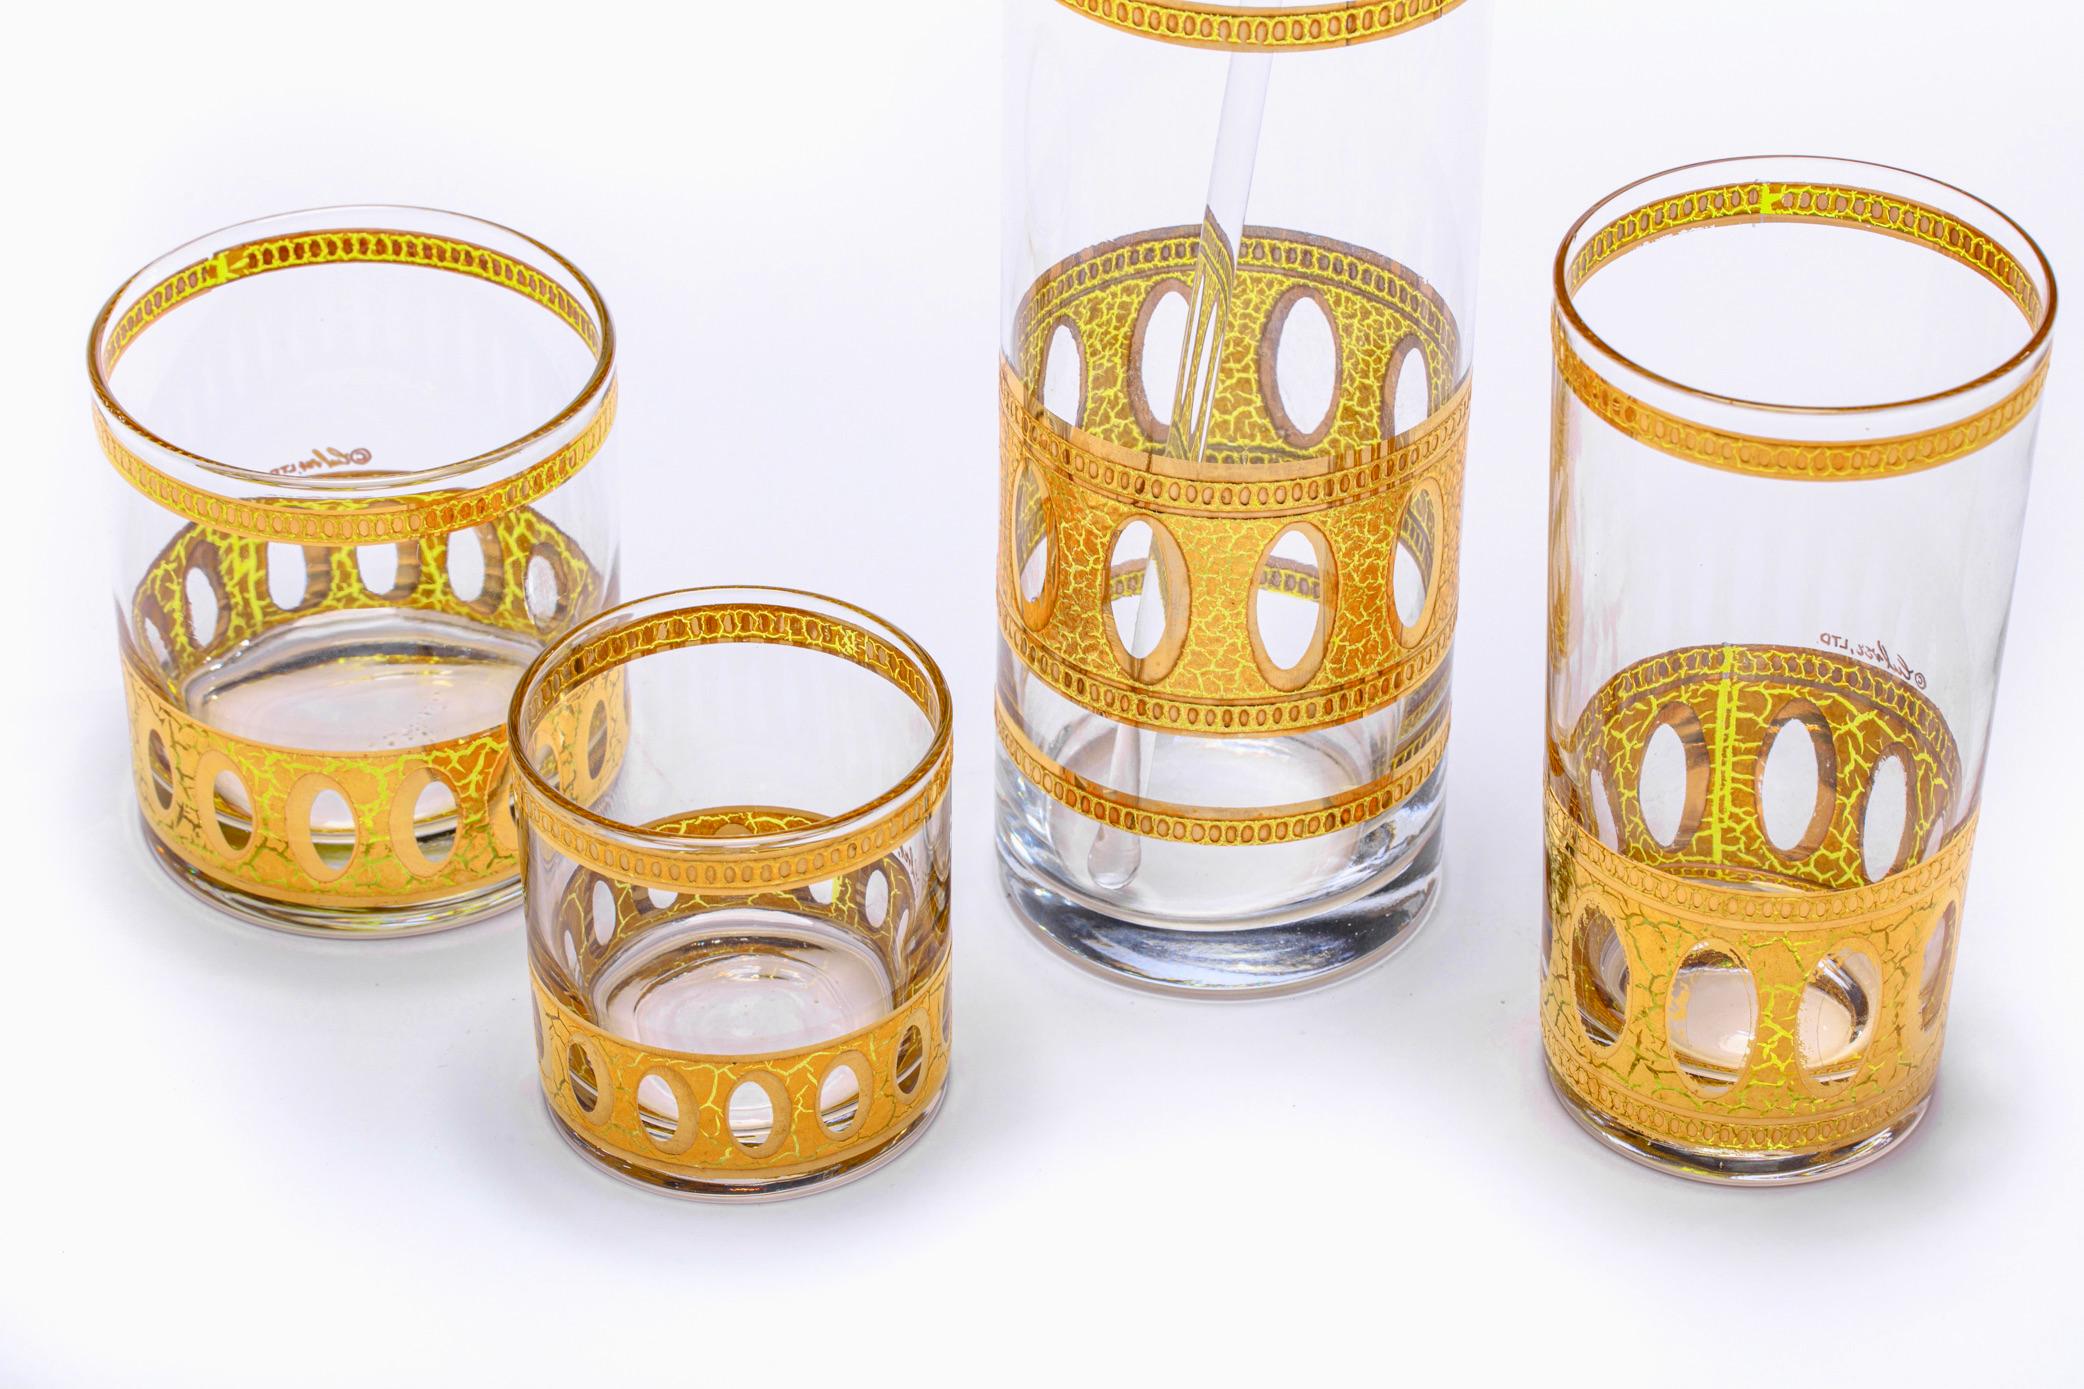 Mid-Century Modern Gold Plated Barware Set of Glasses & Mixer by Culver c. 1965 For Sale 6